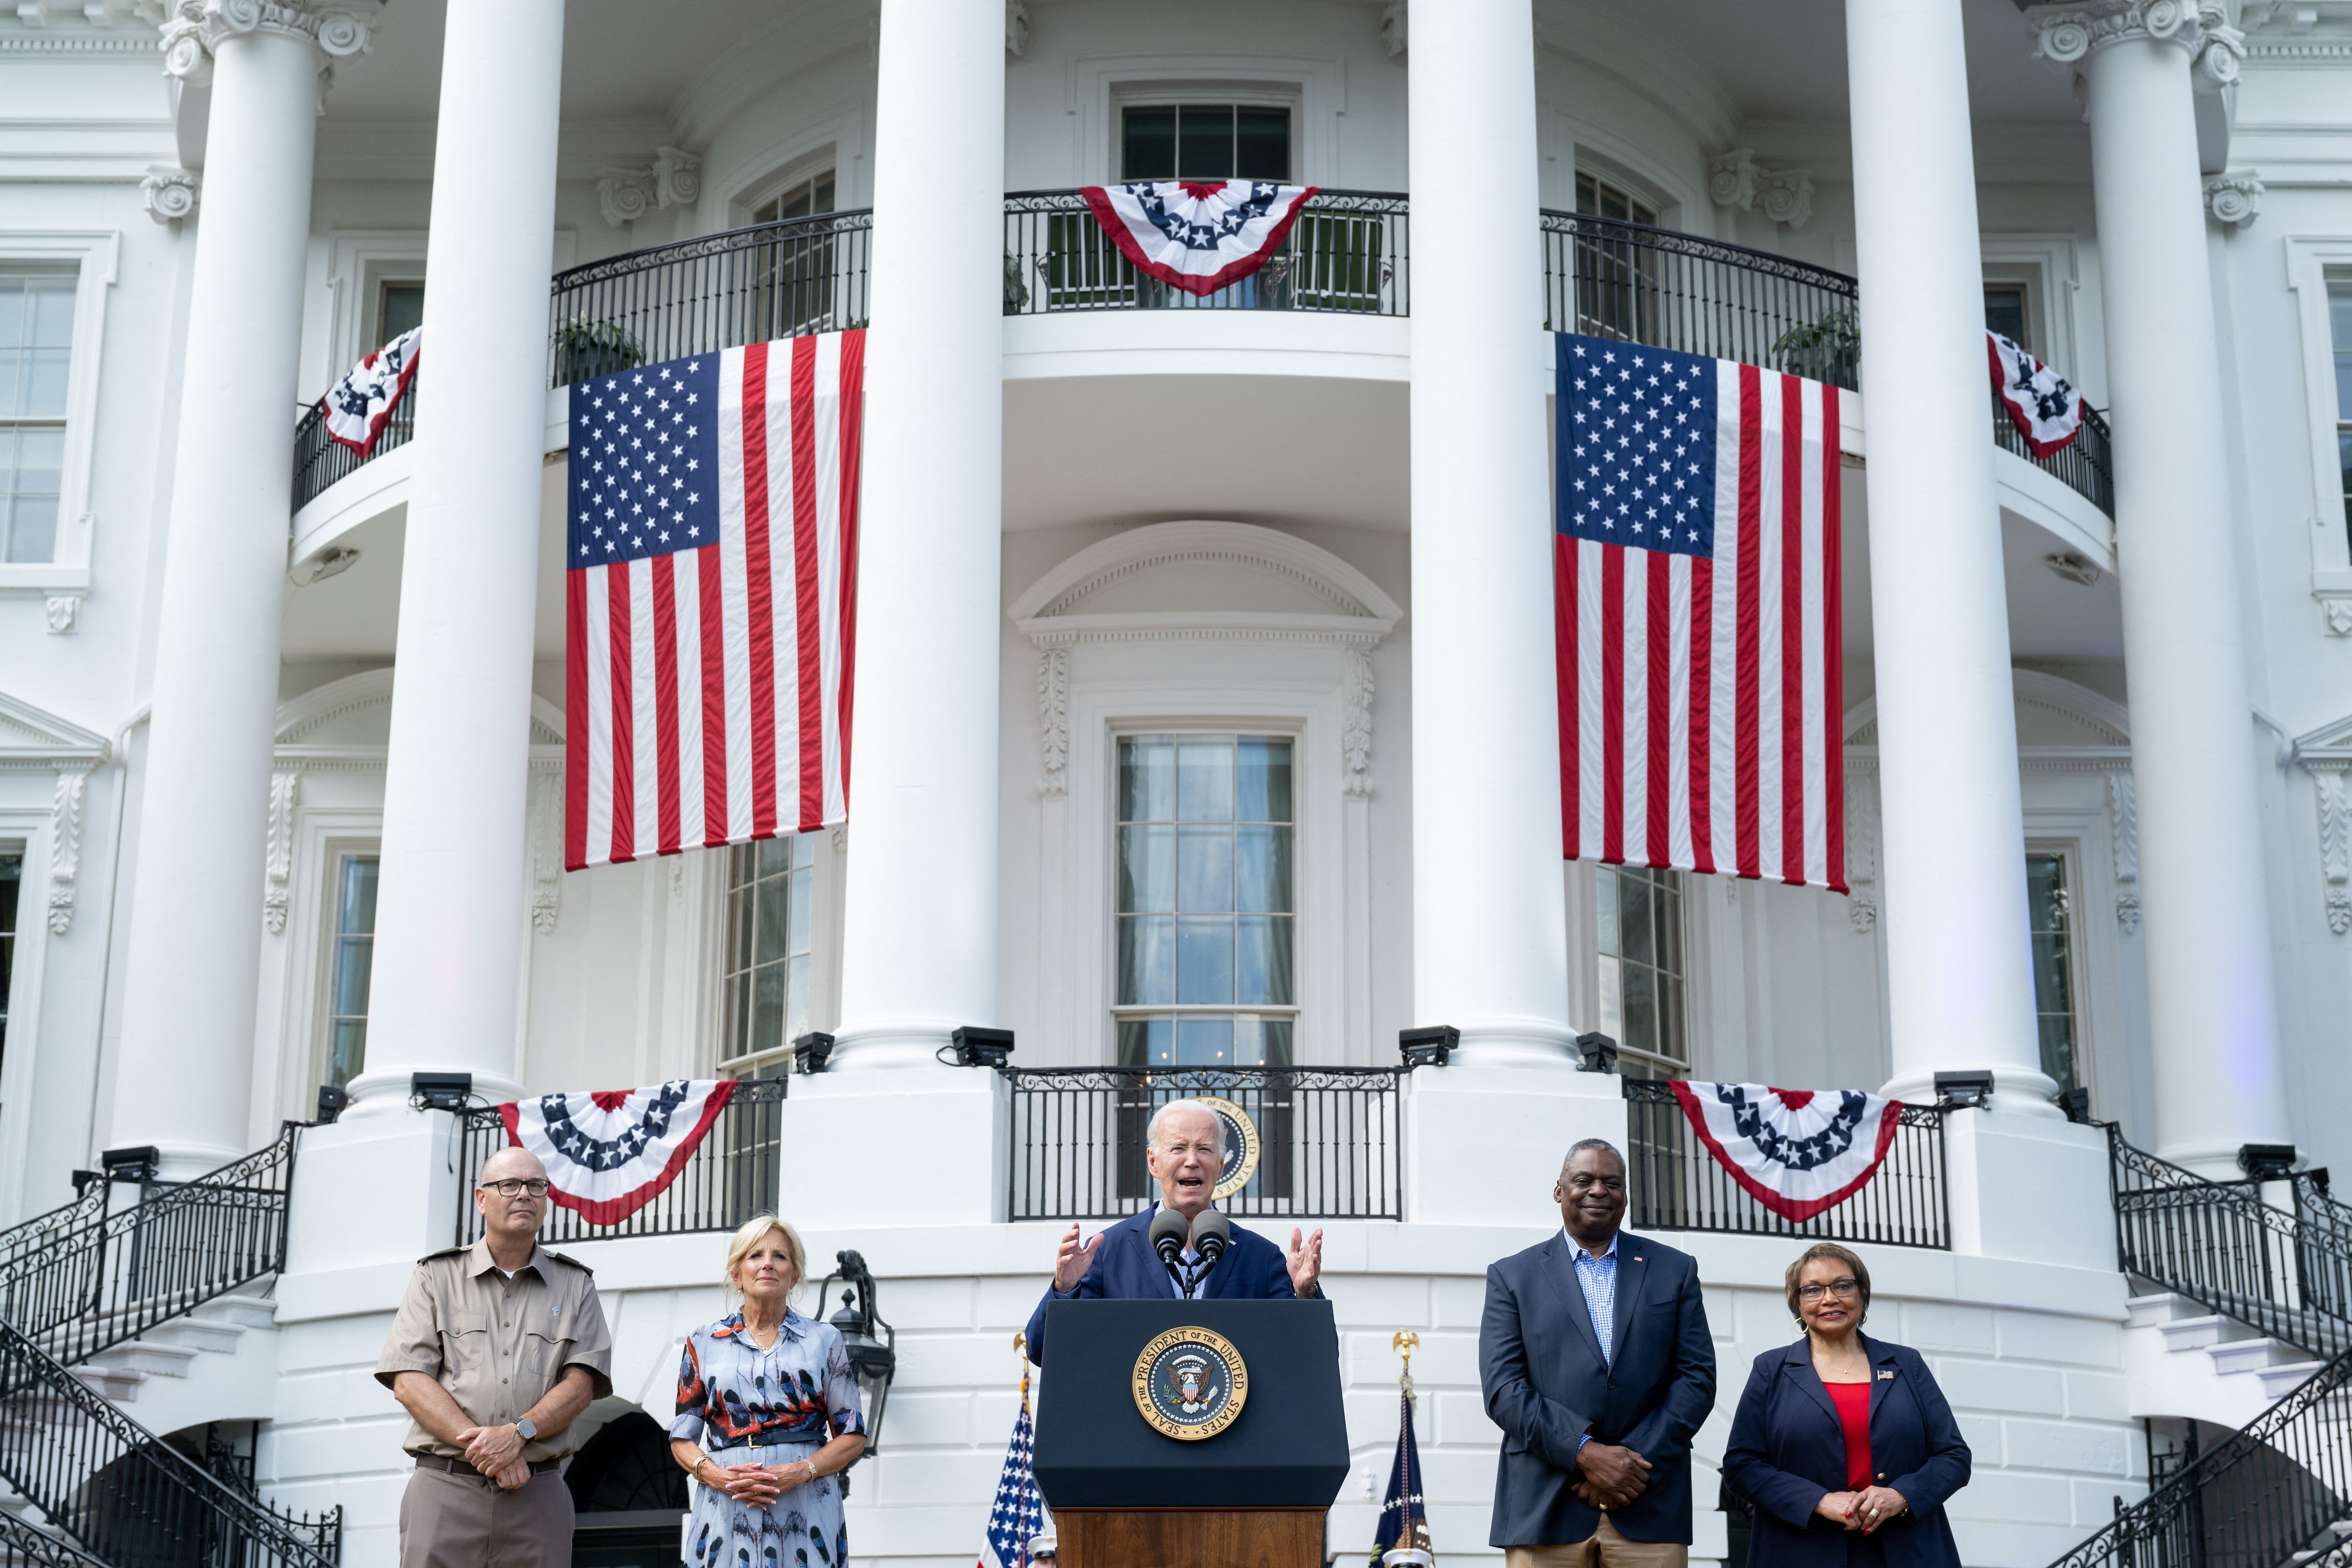 President Joe Biden speaks alongside First Lady Jill Biden (L) and Secretary of Defense Lloyd Austin (R) during a barbeque for active-duty military families in honor of the Fourth of July on the South Lawn of the White House in Washington, DC, July 4, 2023.